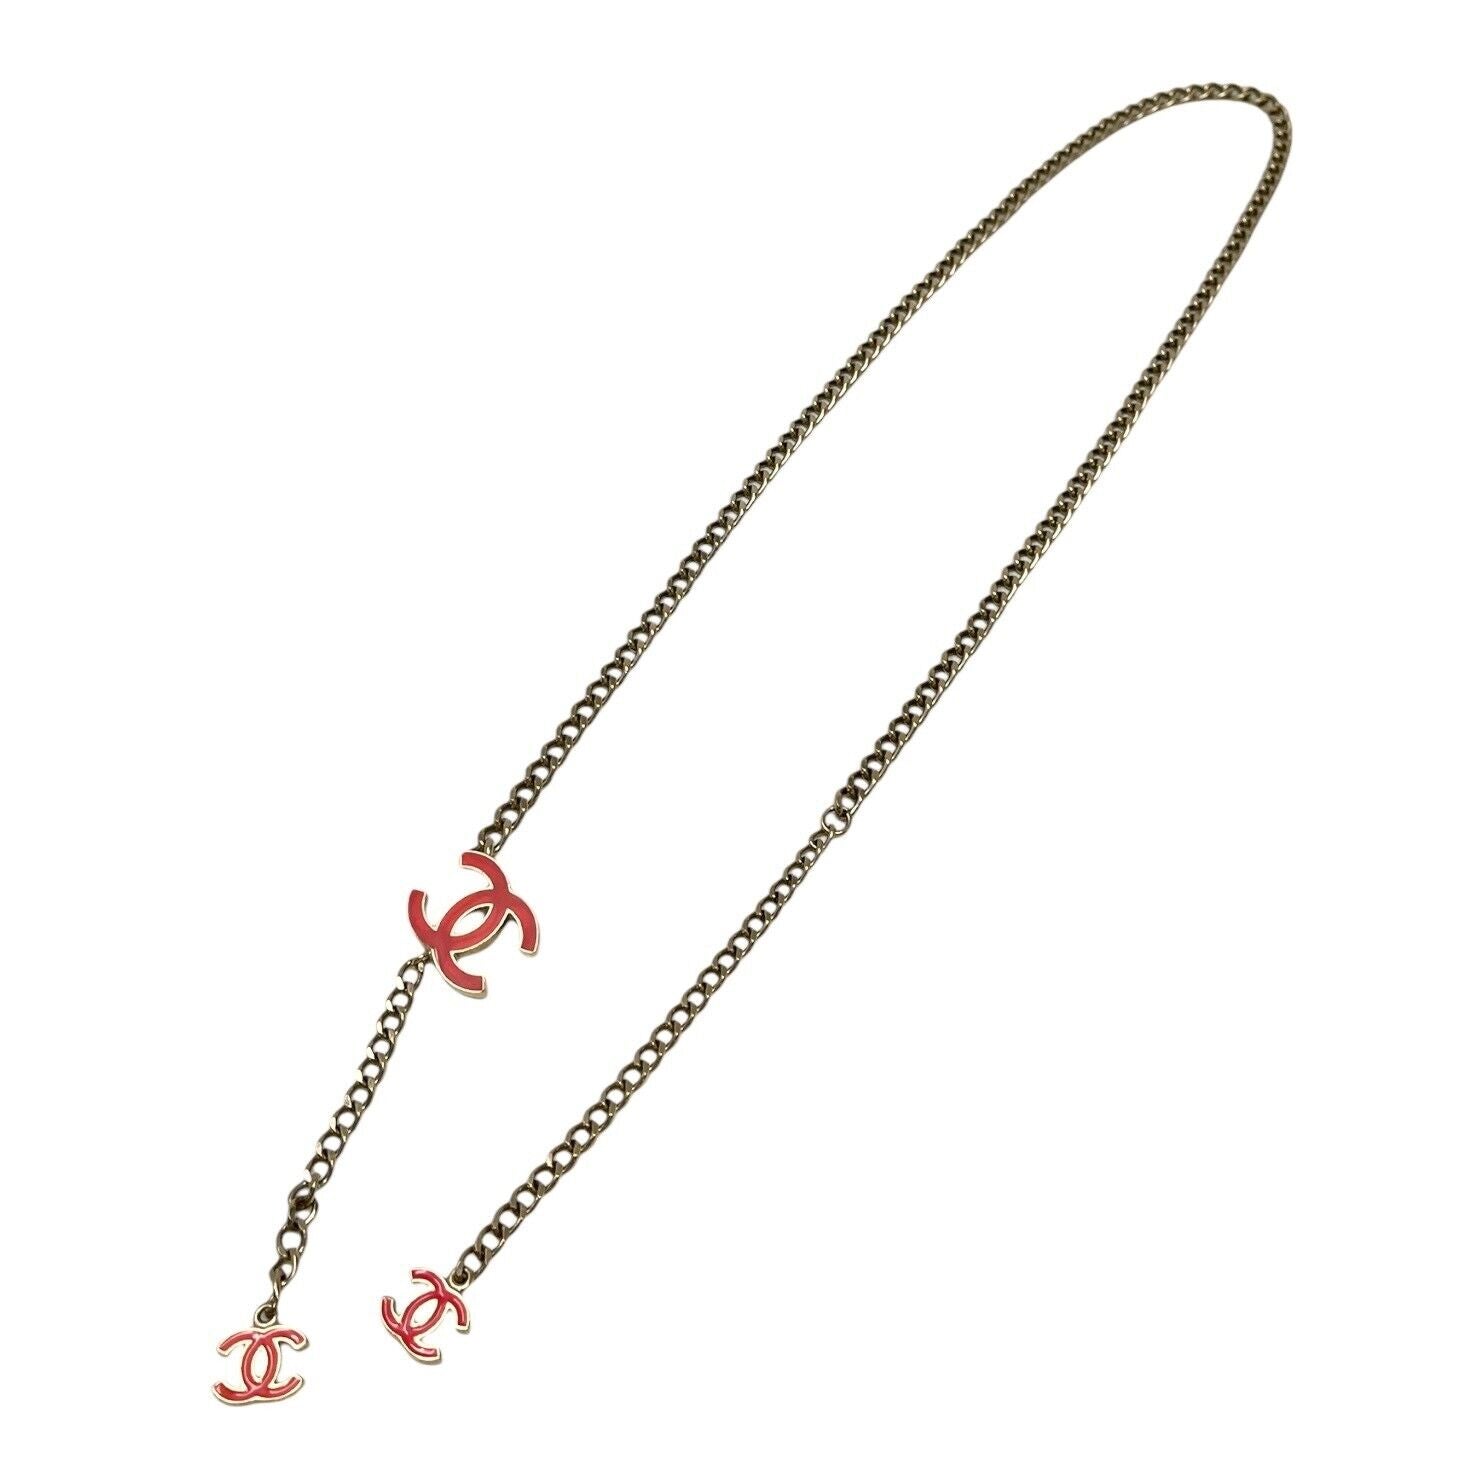 CHANEL Vintage 04A CC Mark Chain Belt Champagne Gold Red Metal Rank AB+